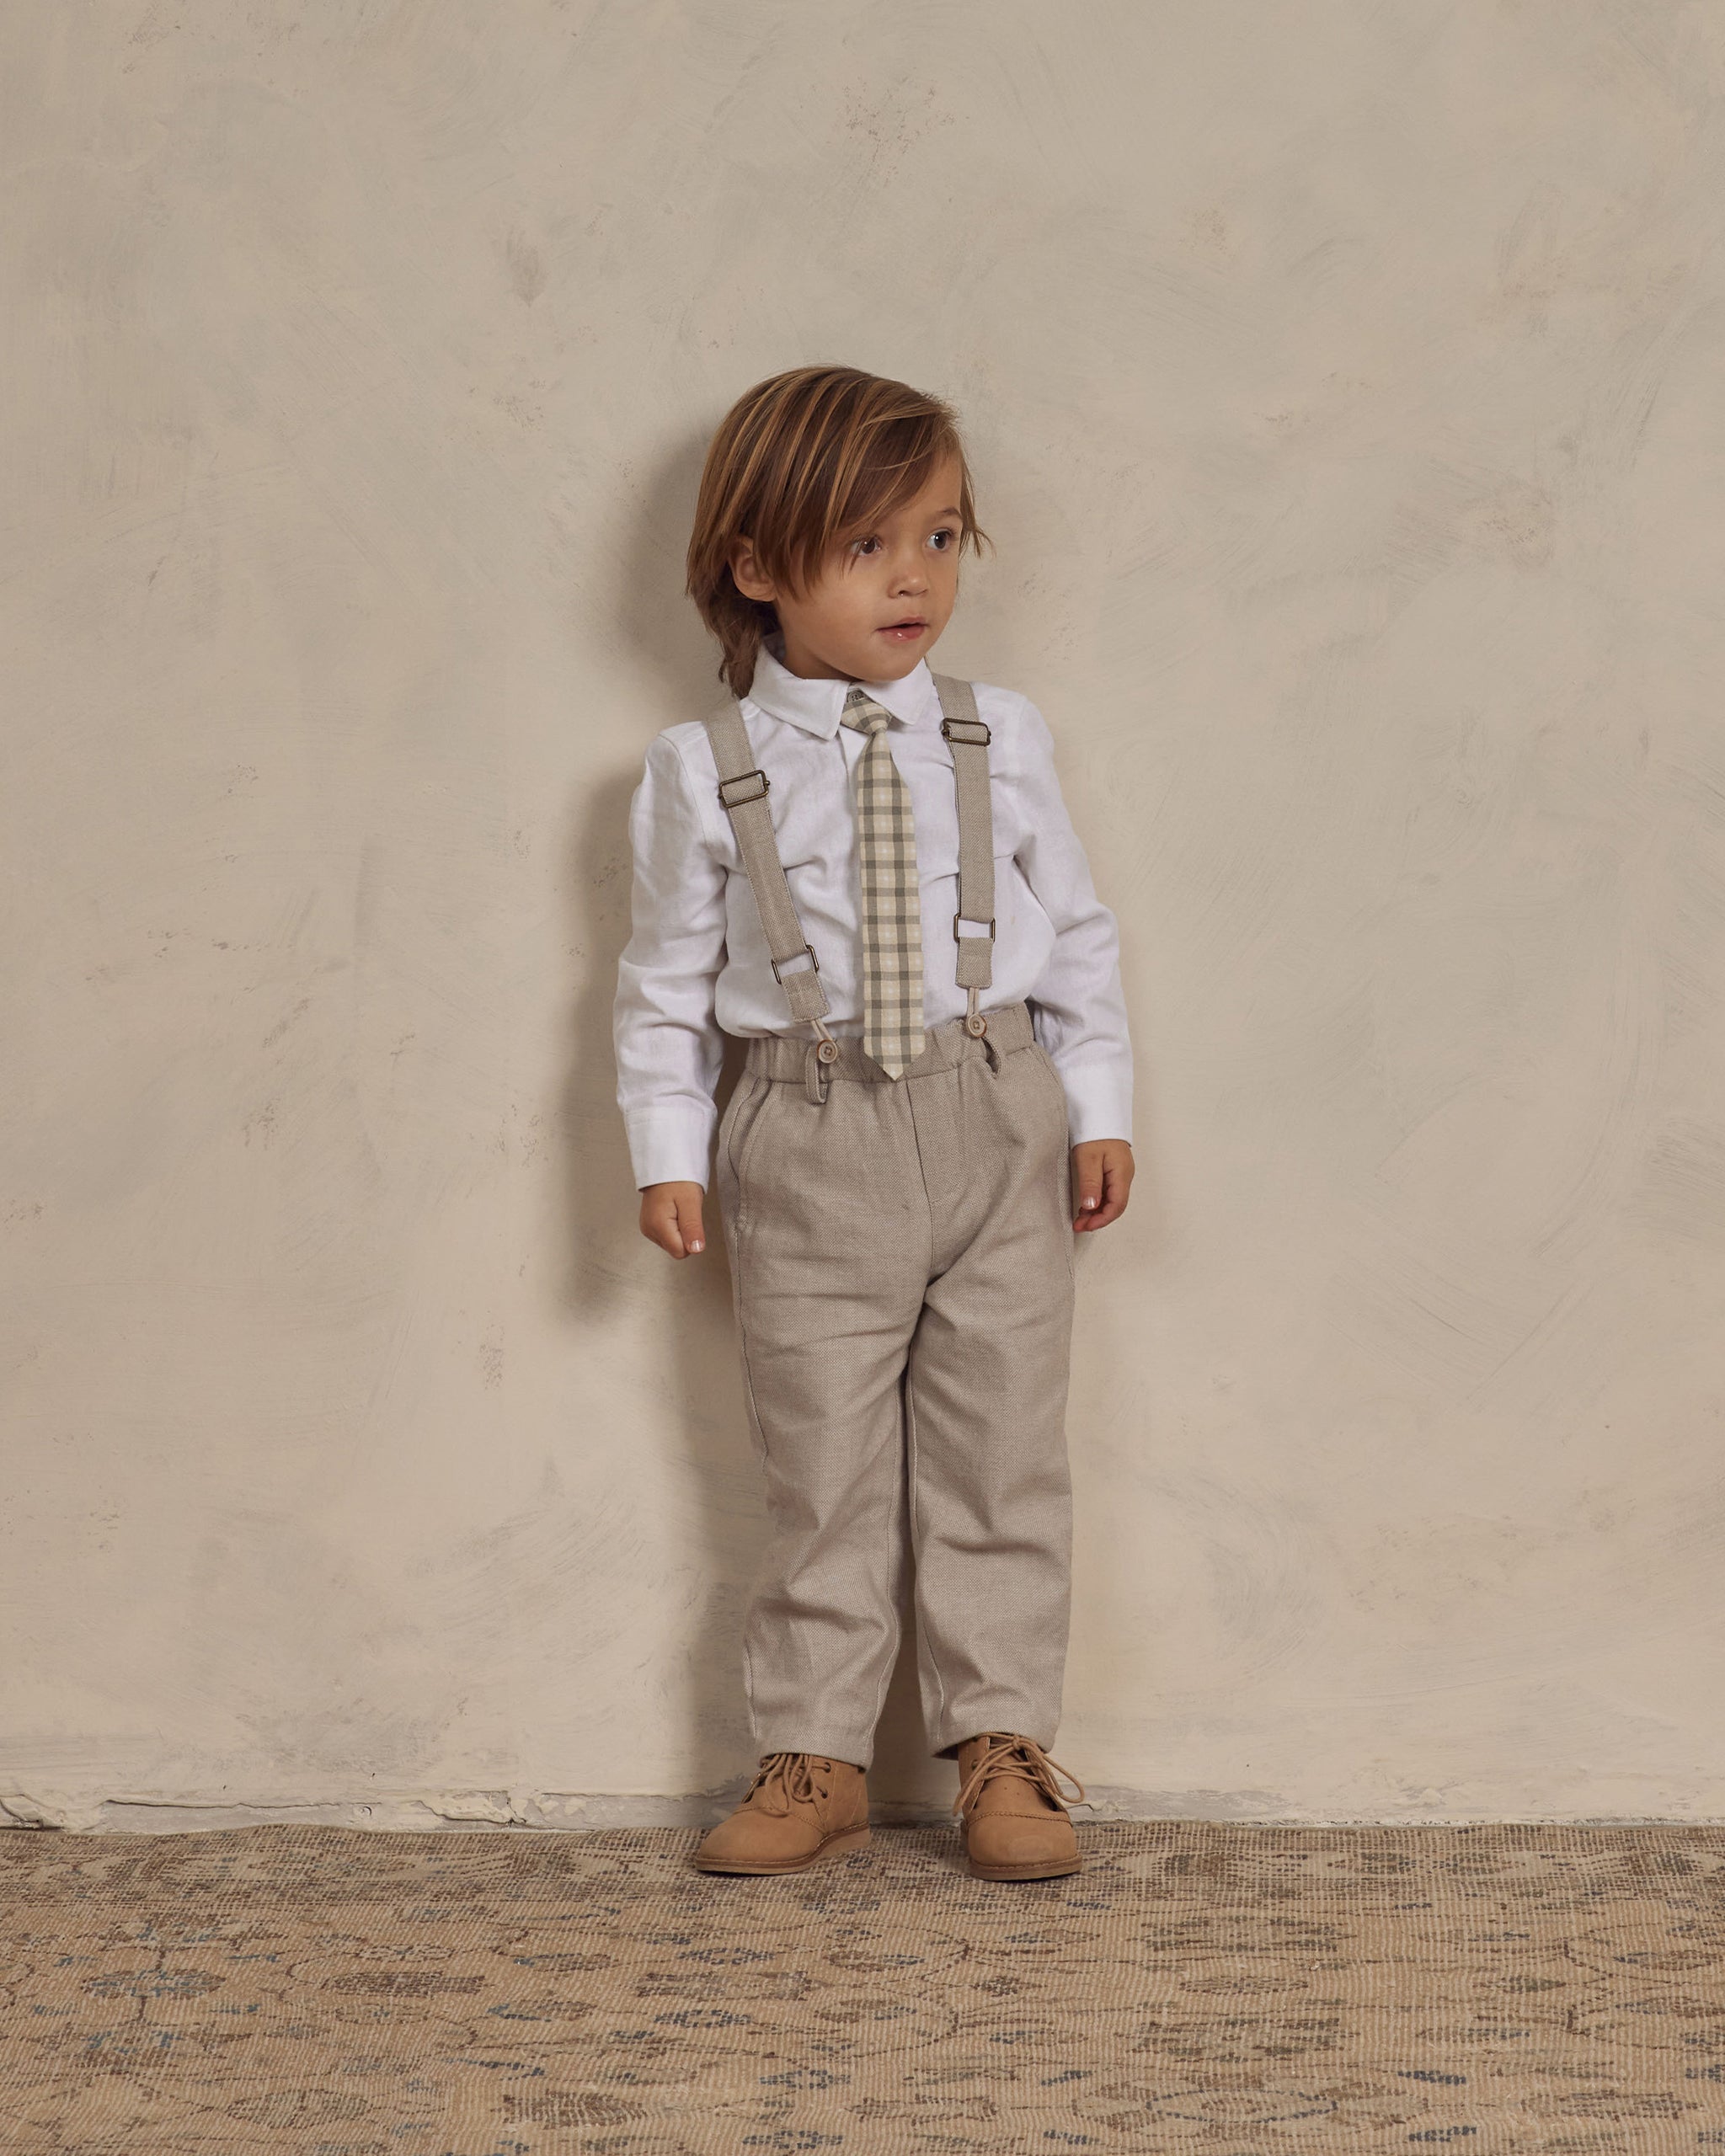 Skinny Tie || Autumn Plaid - Rylee + Cru | Kids Clothes | Trendy Baby Clothes | Modern Infant Outfits |